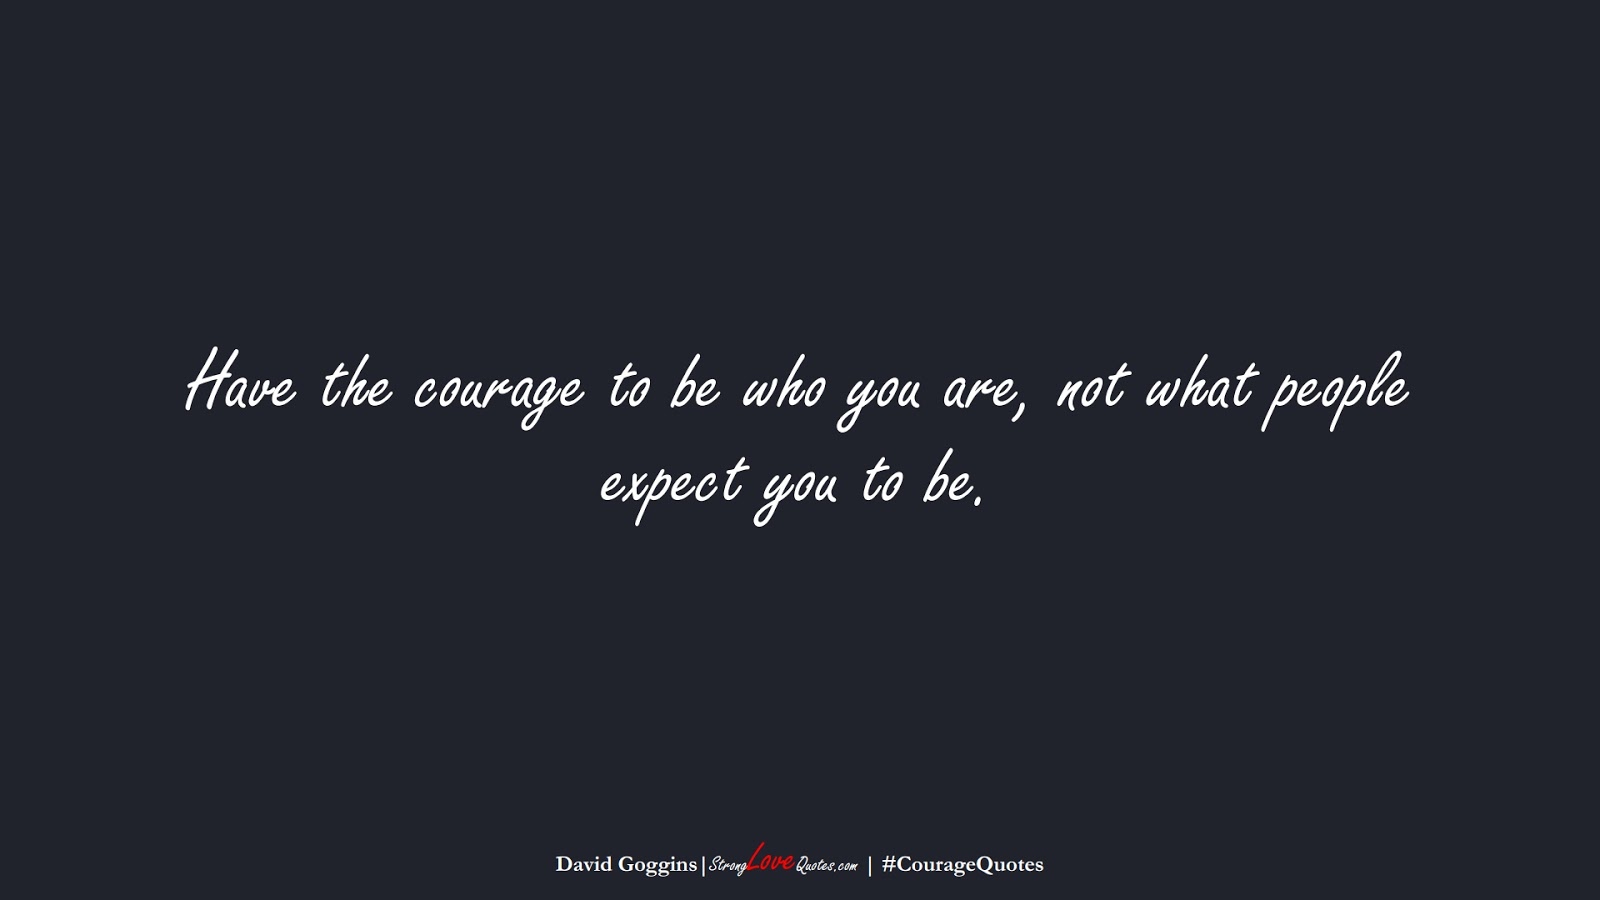 Have the courage to be who you are, not what people expect you to be. (David Goggins);  #CourageQuotes